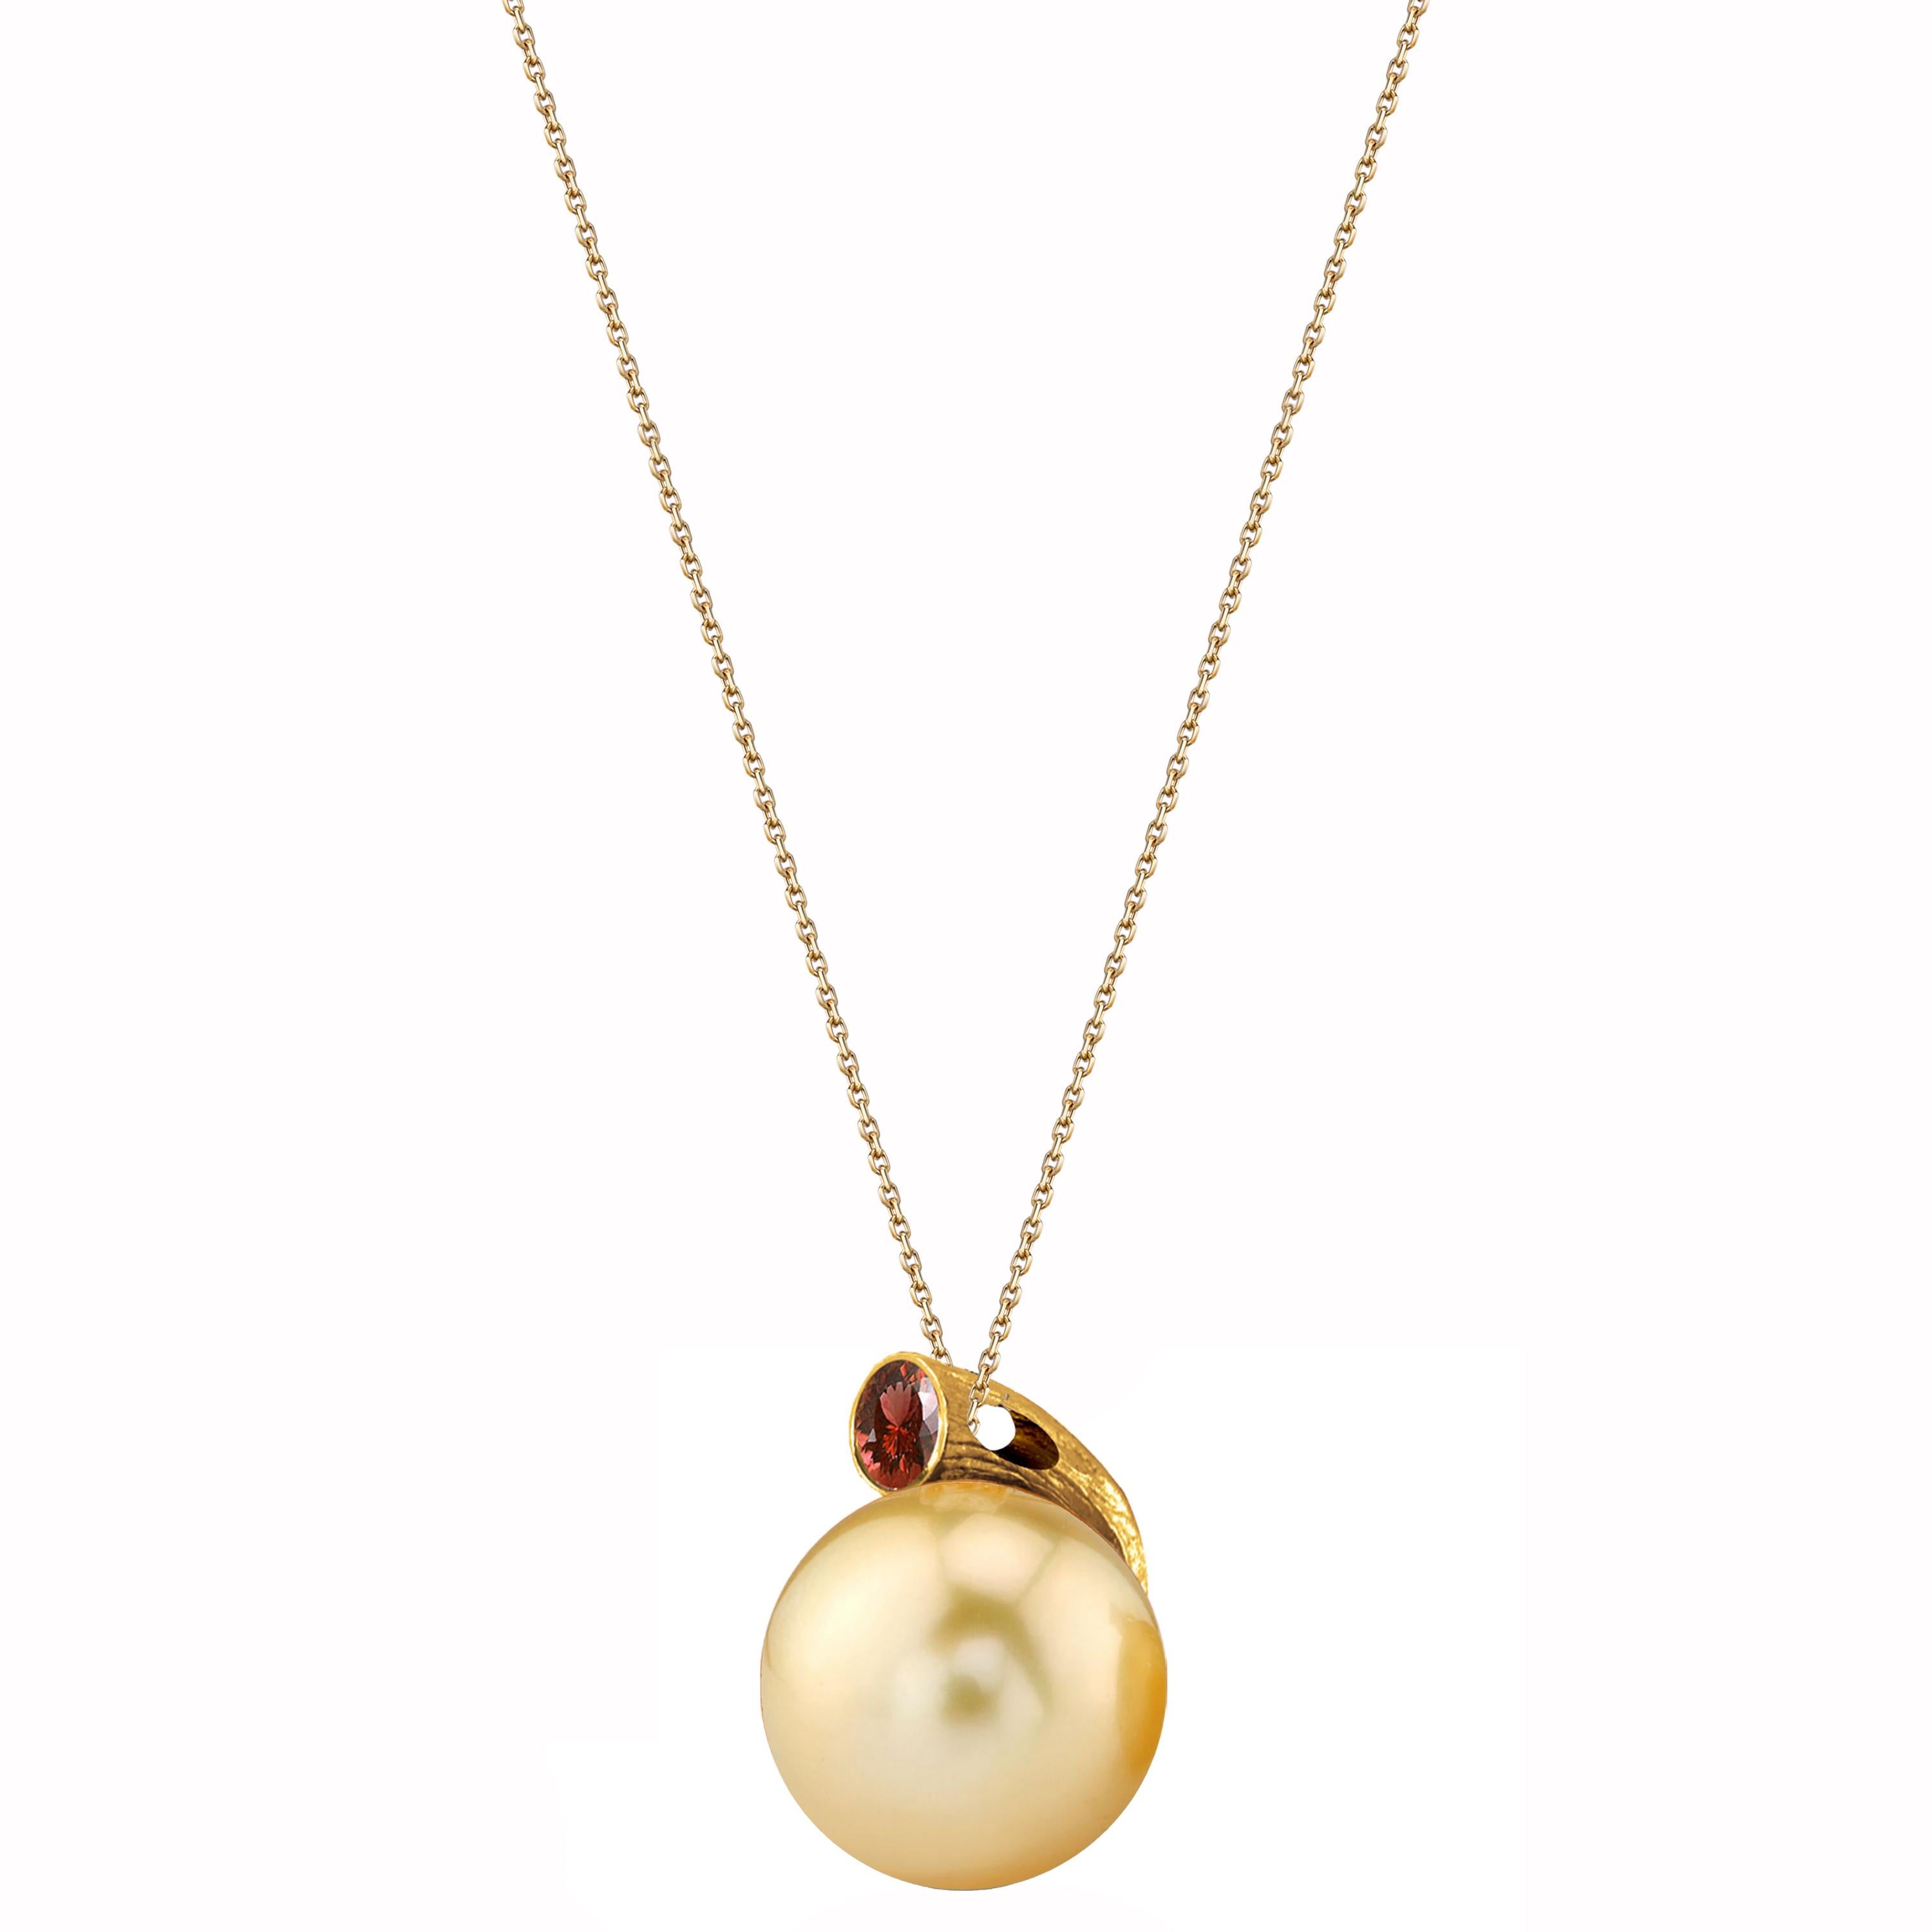 Description:
Dawn stud pendant with 9mm South Sea pearl and 0.03ct garnet, set in textured 18ct yellow gold. Chain is 16 inches + 2 inch extension.

Inspiration:
With the inspiration from Coral forming the sculptural essence of this collection, the